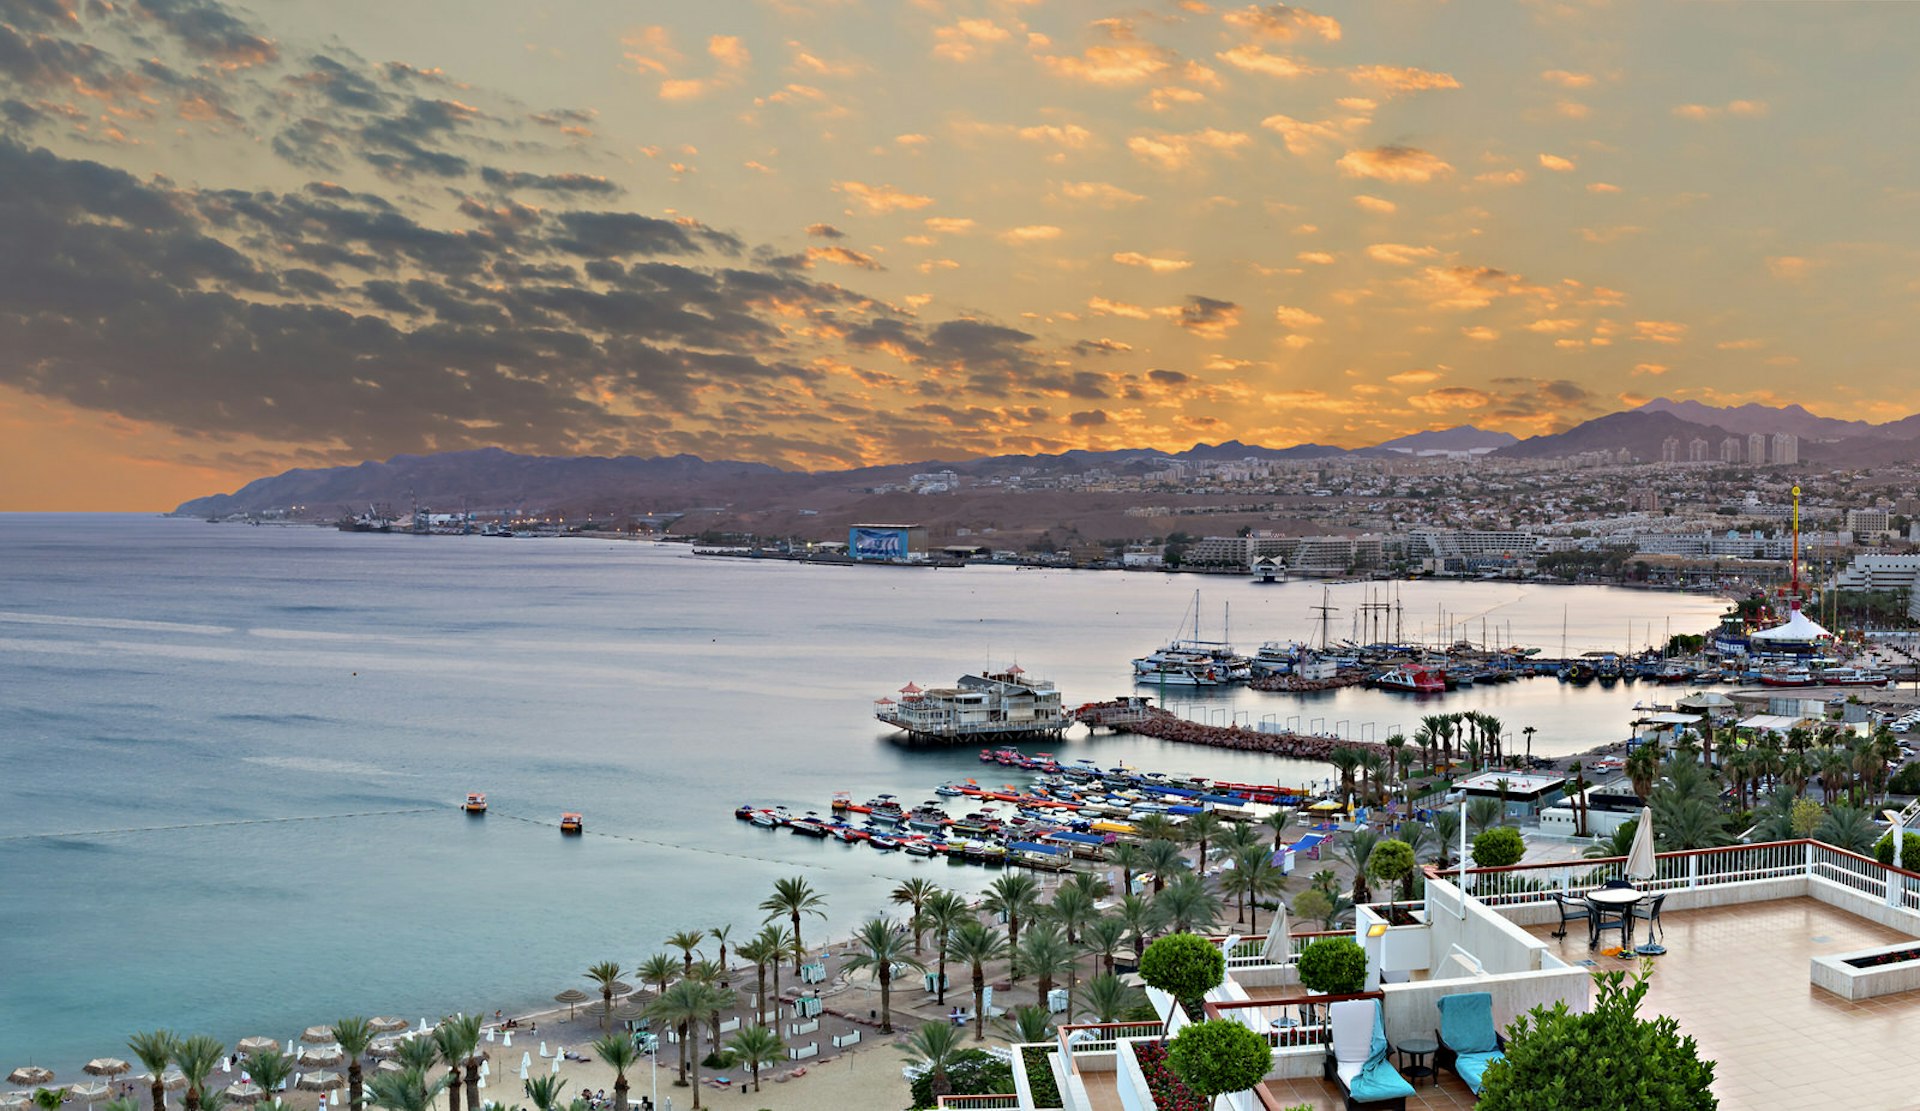 Bird's eye view the Red sea and Eilat at sunset. Image by gorsh13 / Getty Images